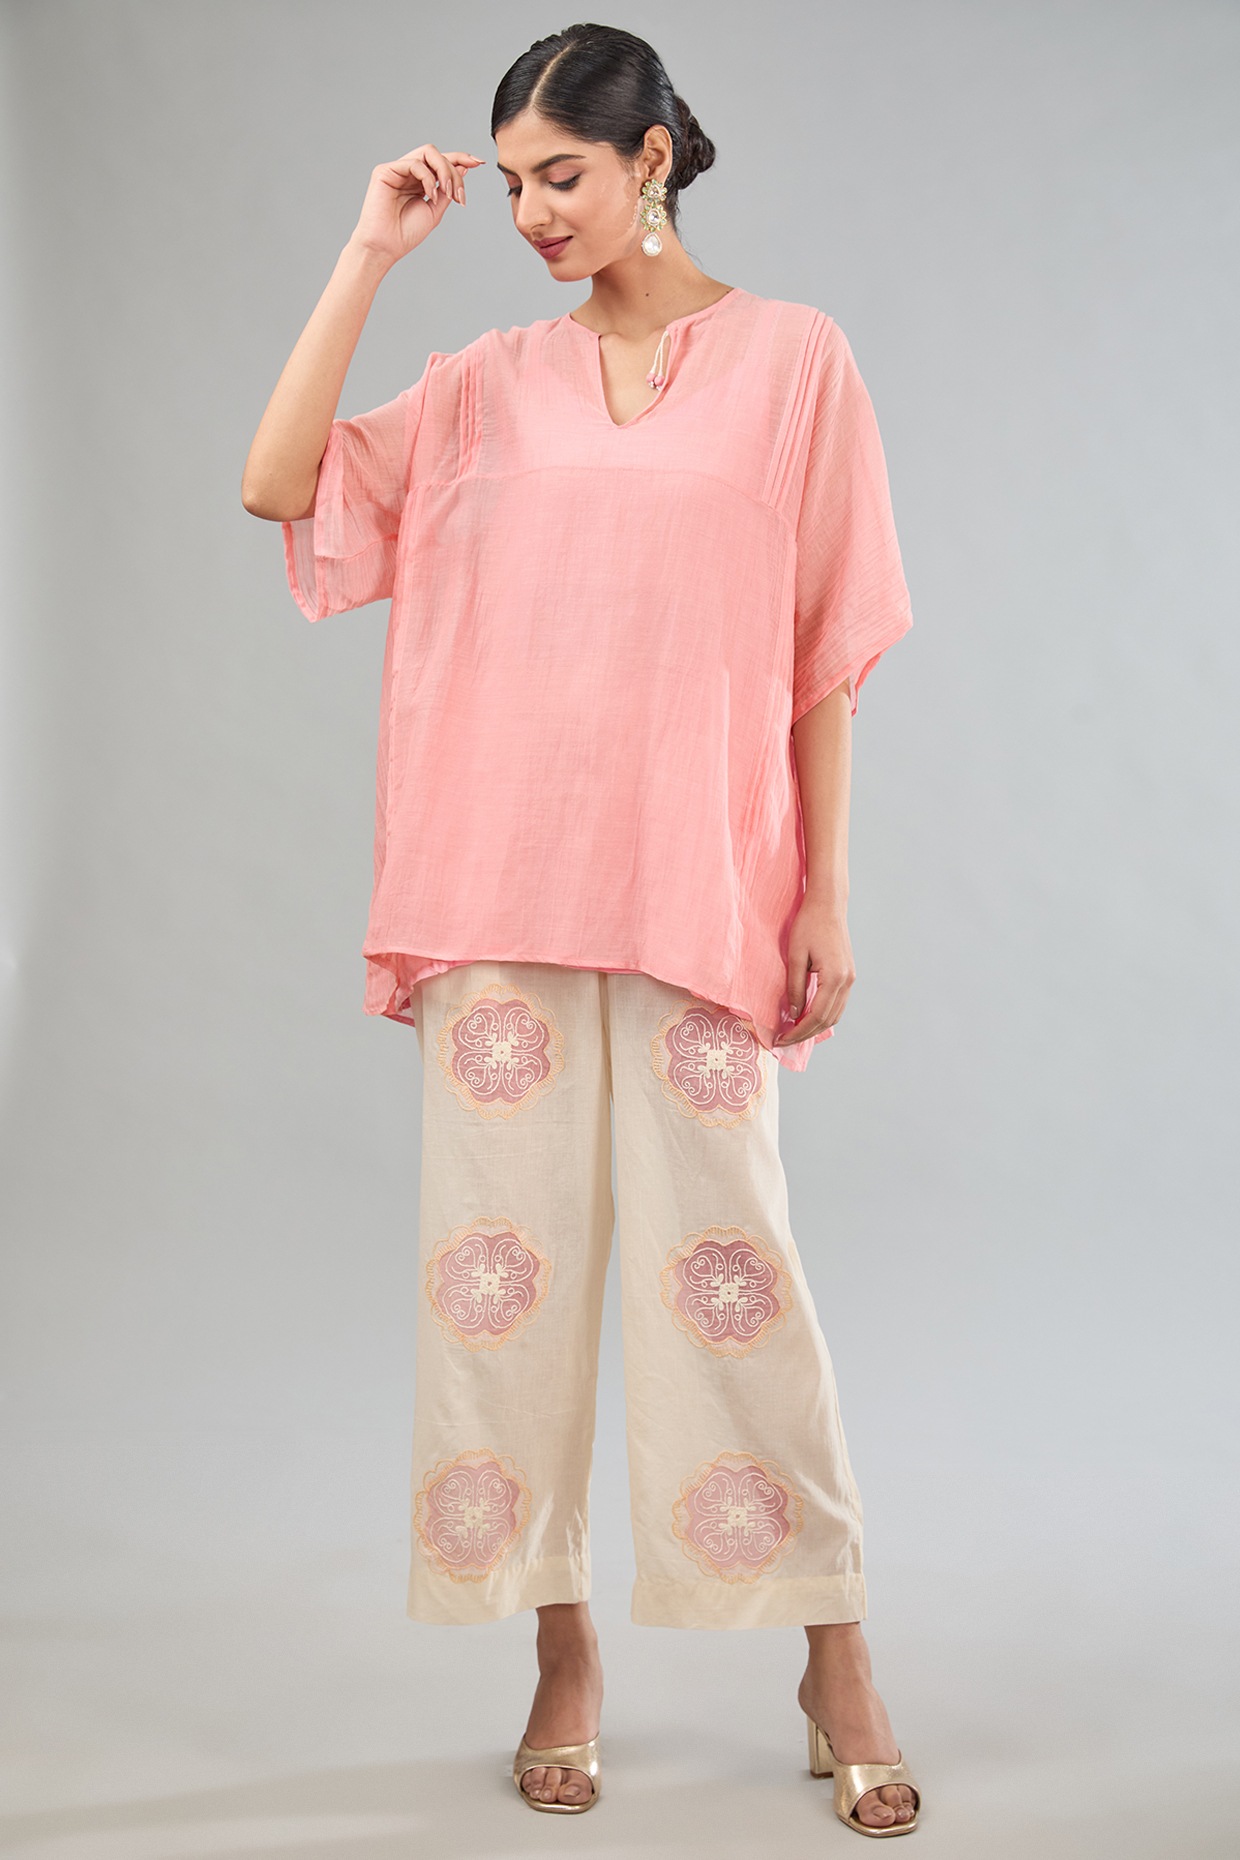 Shop Palazzos & Trousers For Women Online From Spykar